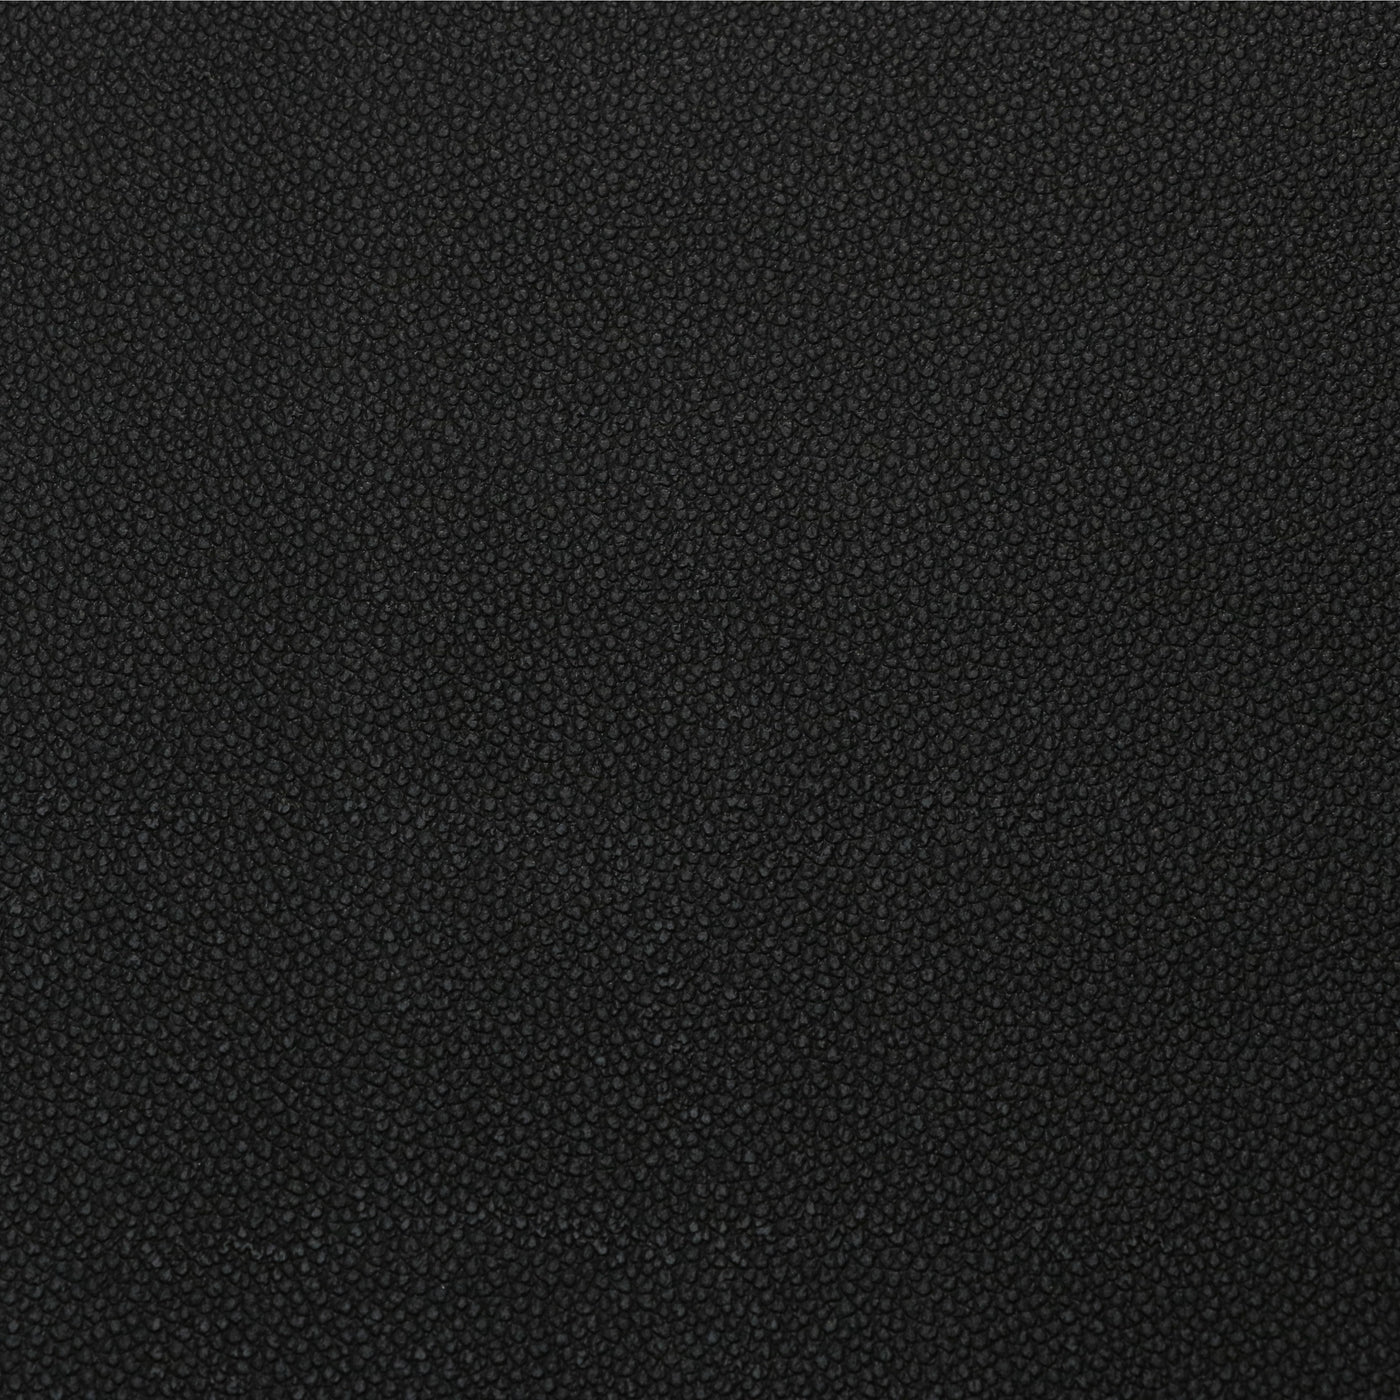 Packaged 1/2 Yard Cut: Black Pebble Faux Leather